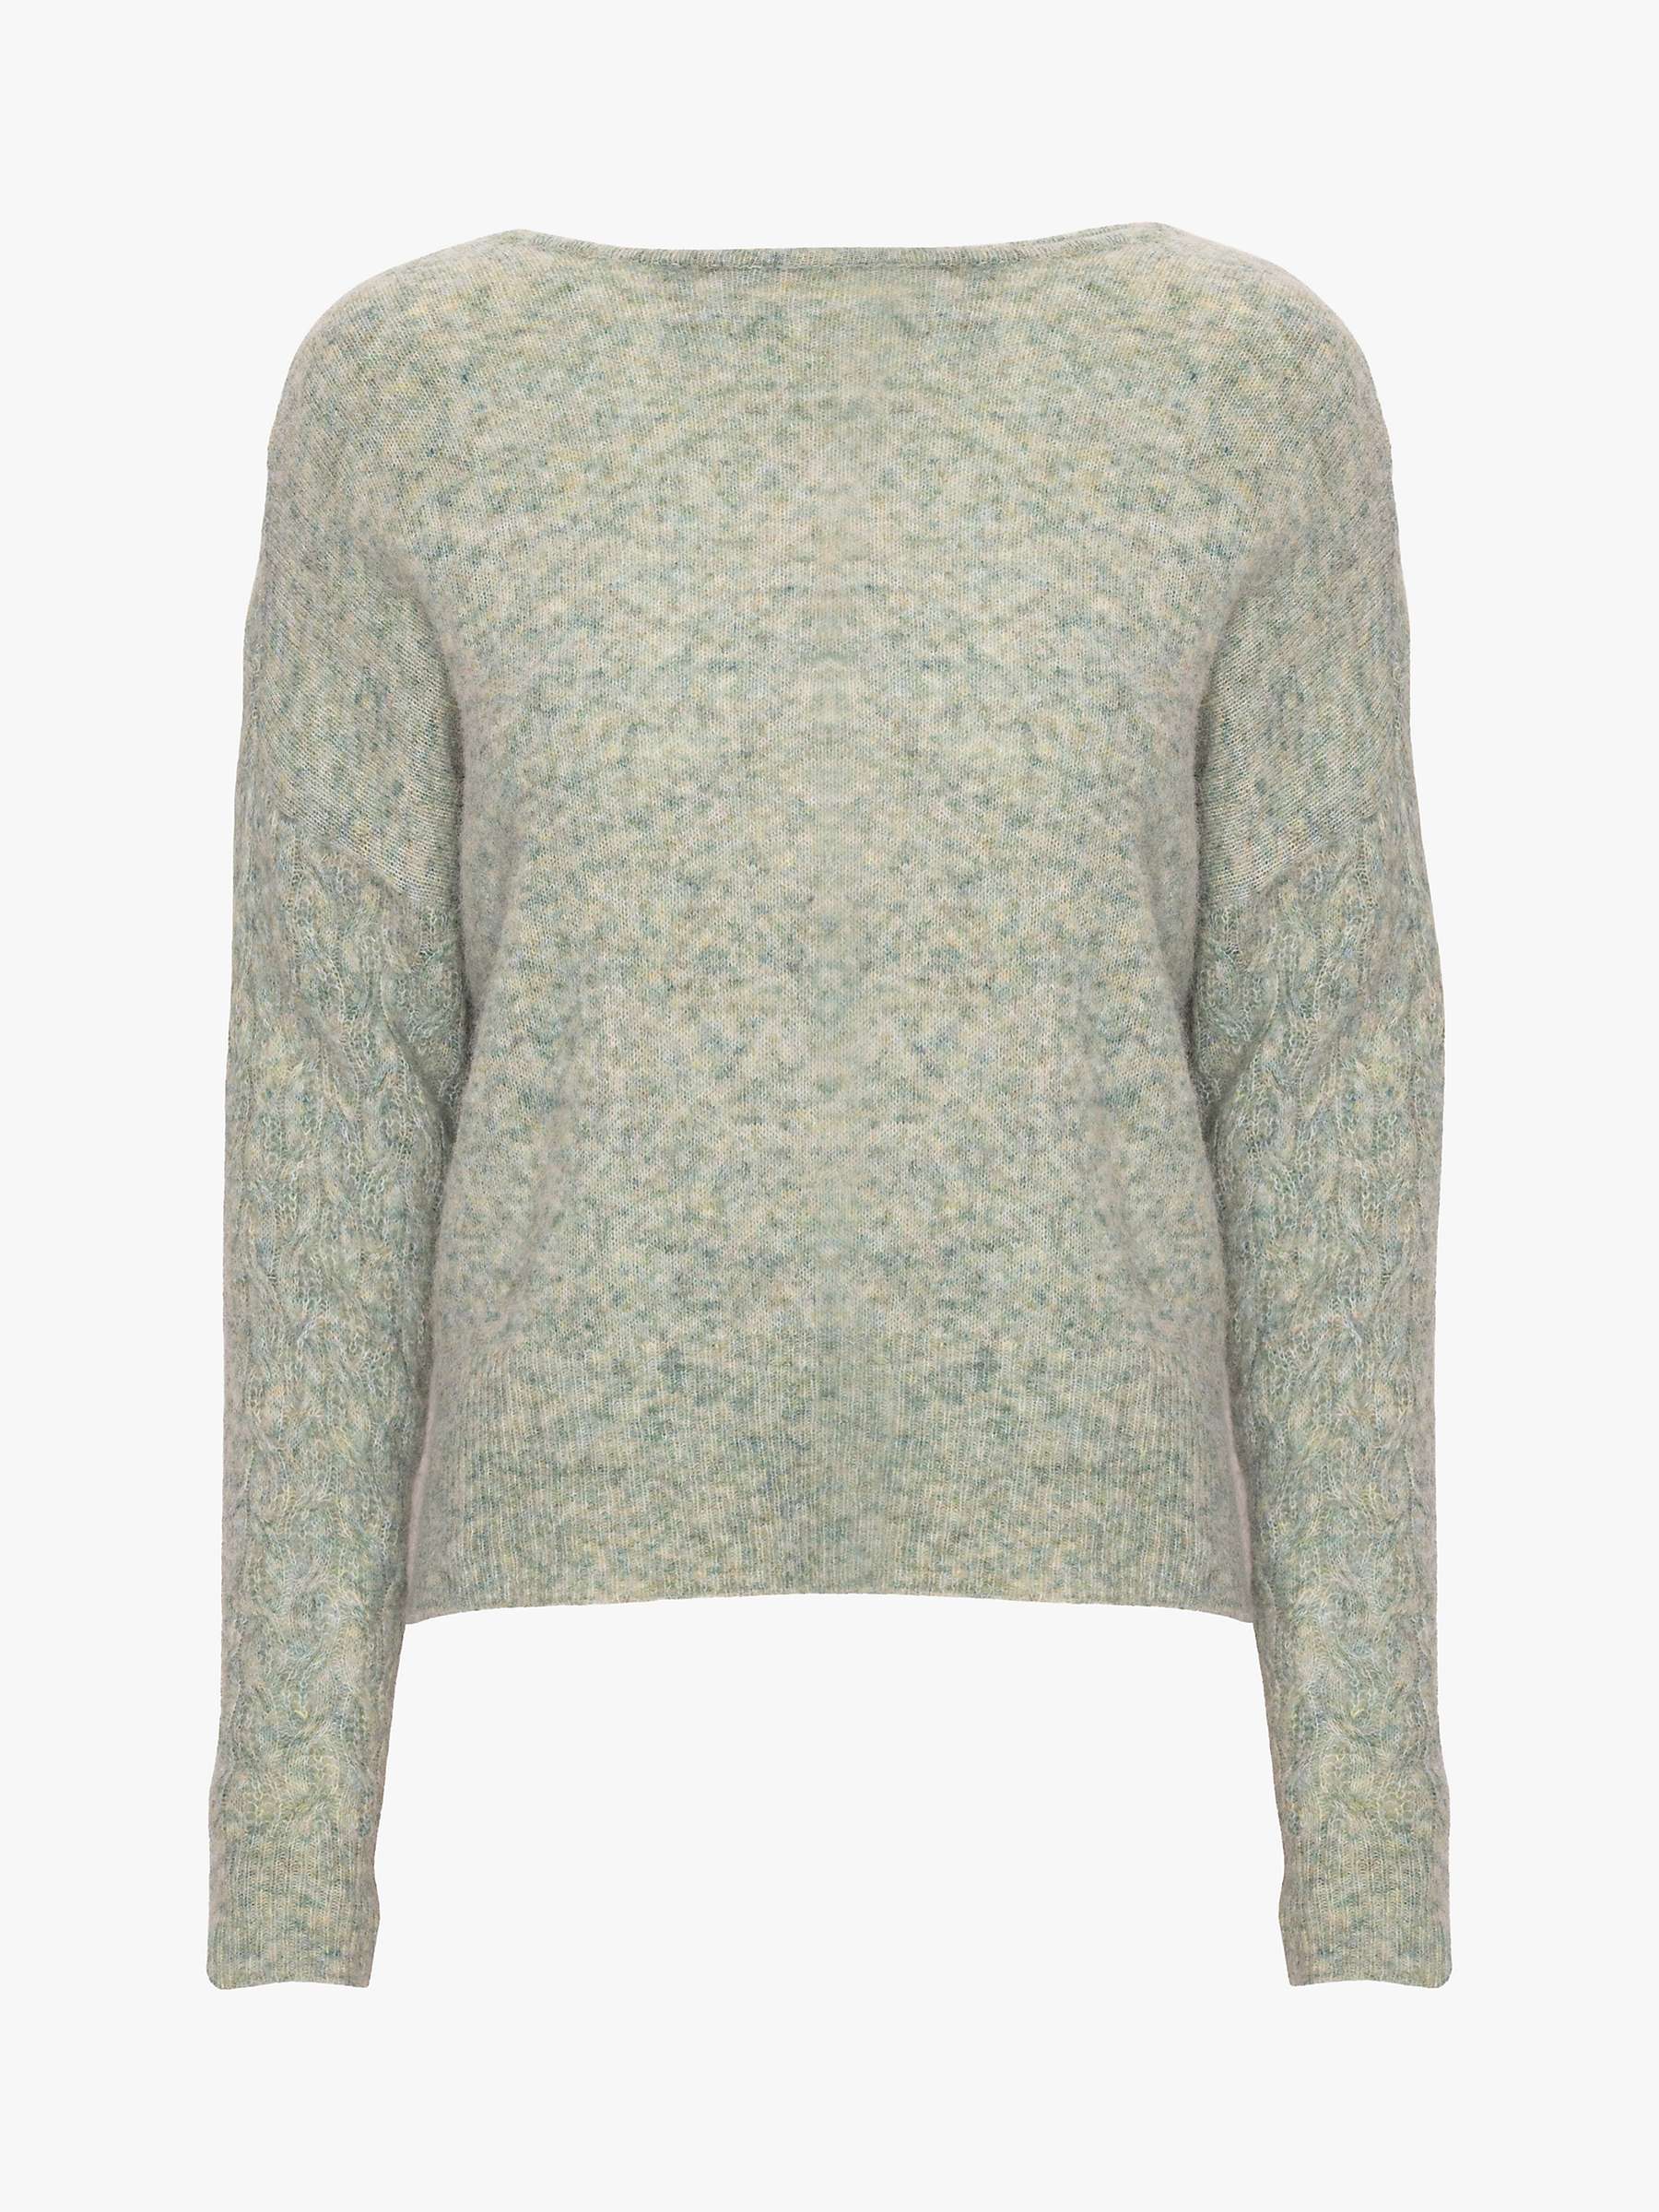 Buy A-VIEW Filippa Knitted Reversible Jumper, Dusty Mint Online at johnlewis.com